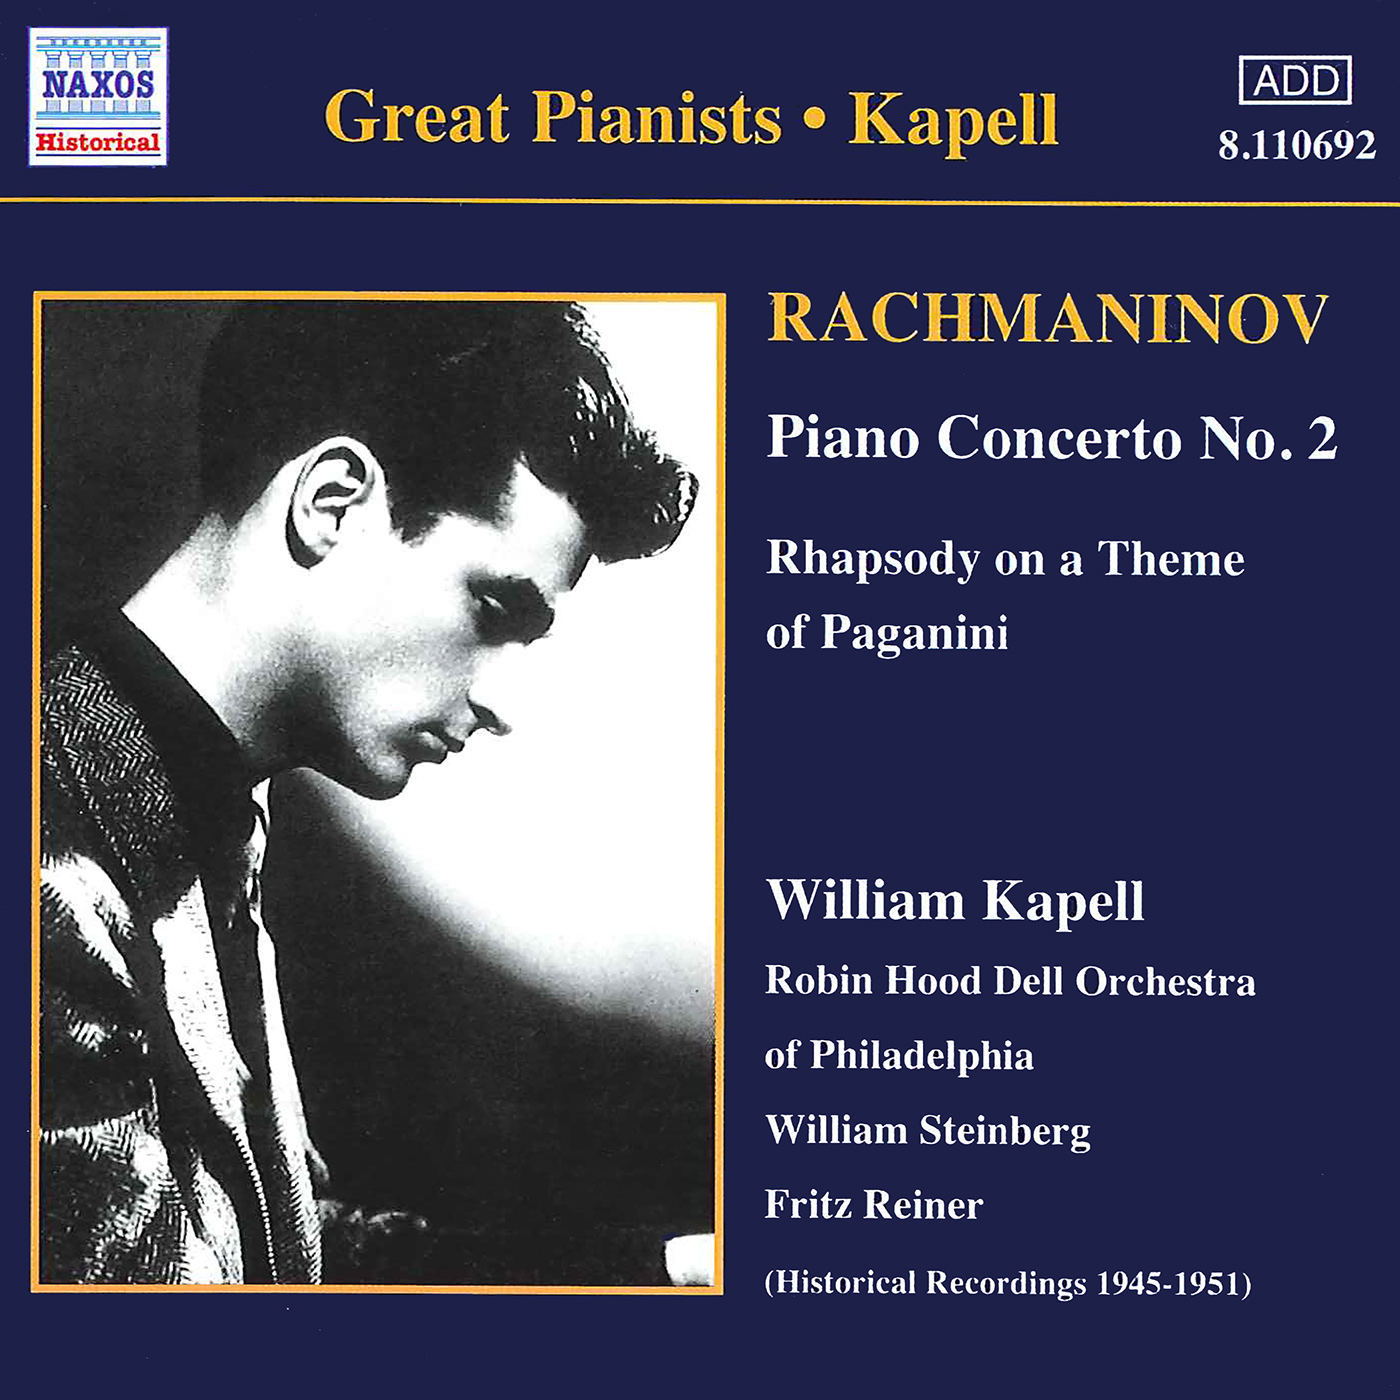 Rhapsody on a Theme of Paganini, Op. 43:Variation XII: Tempo di minuetto